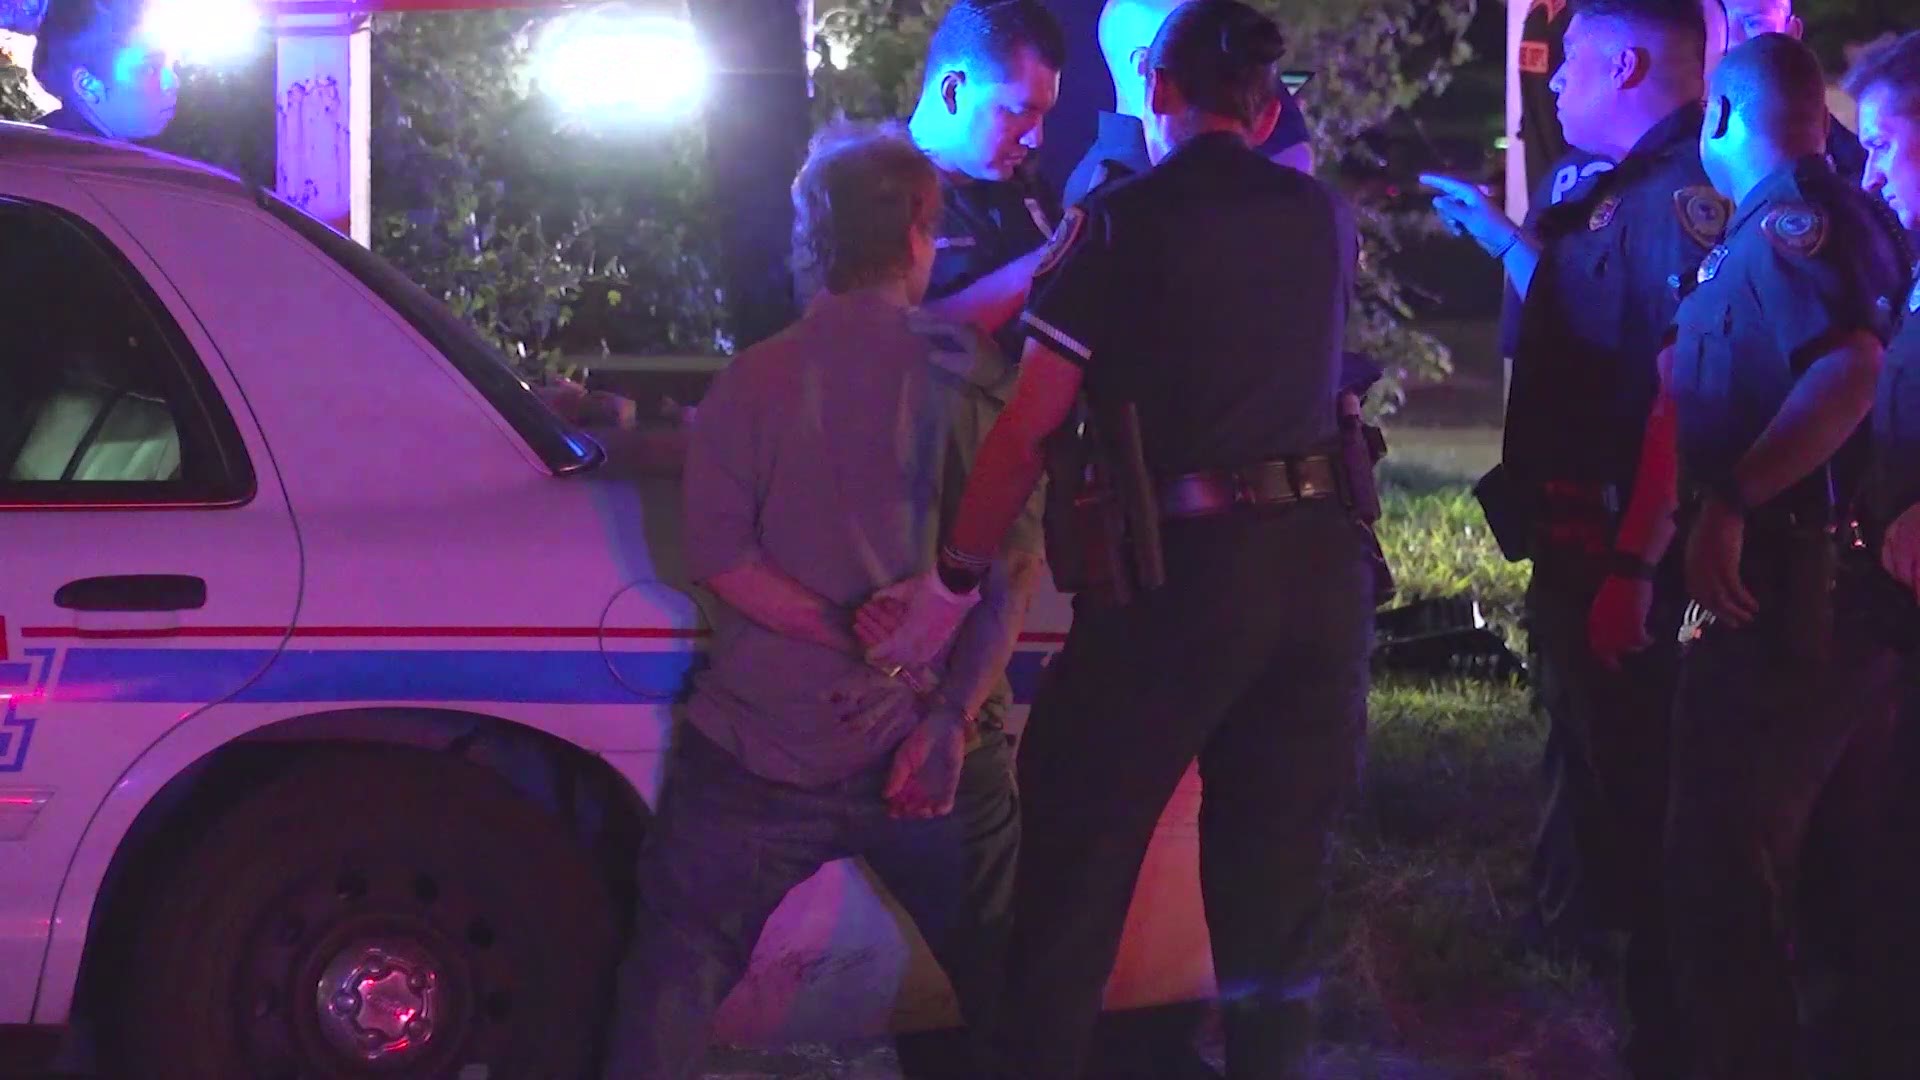 A woman is in police custody after leading police on a chase that ended with a crash that sent her, a deputy constable and two others to the hospital.